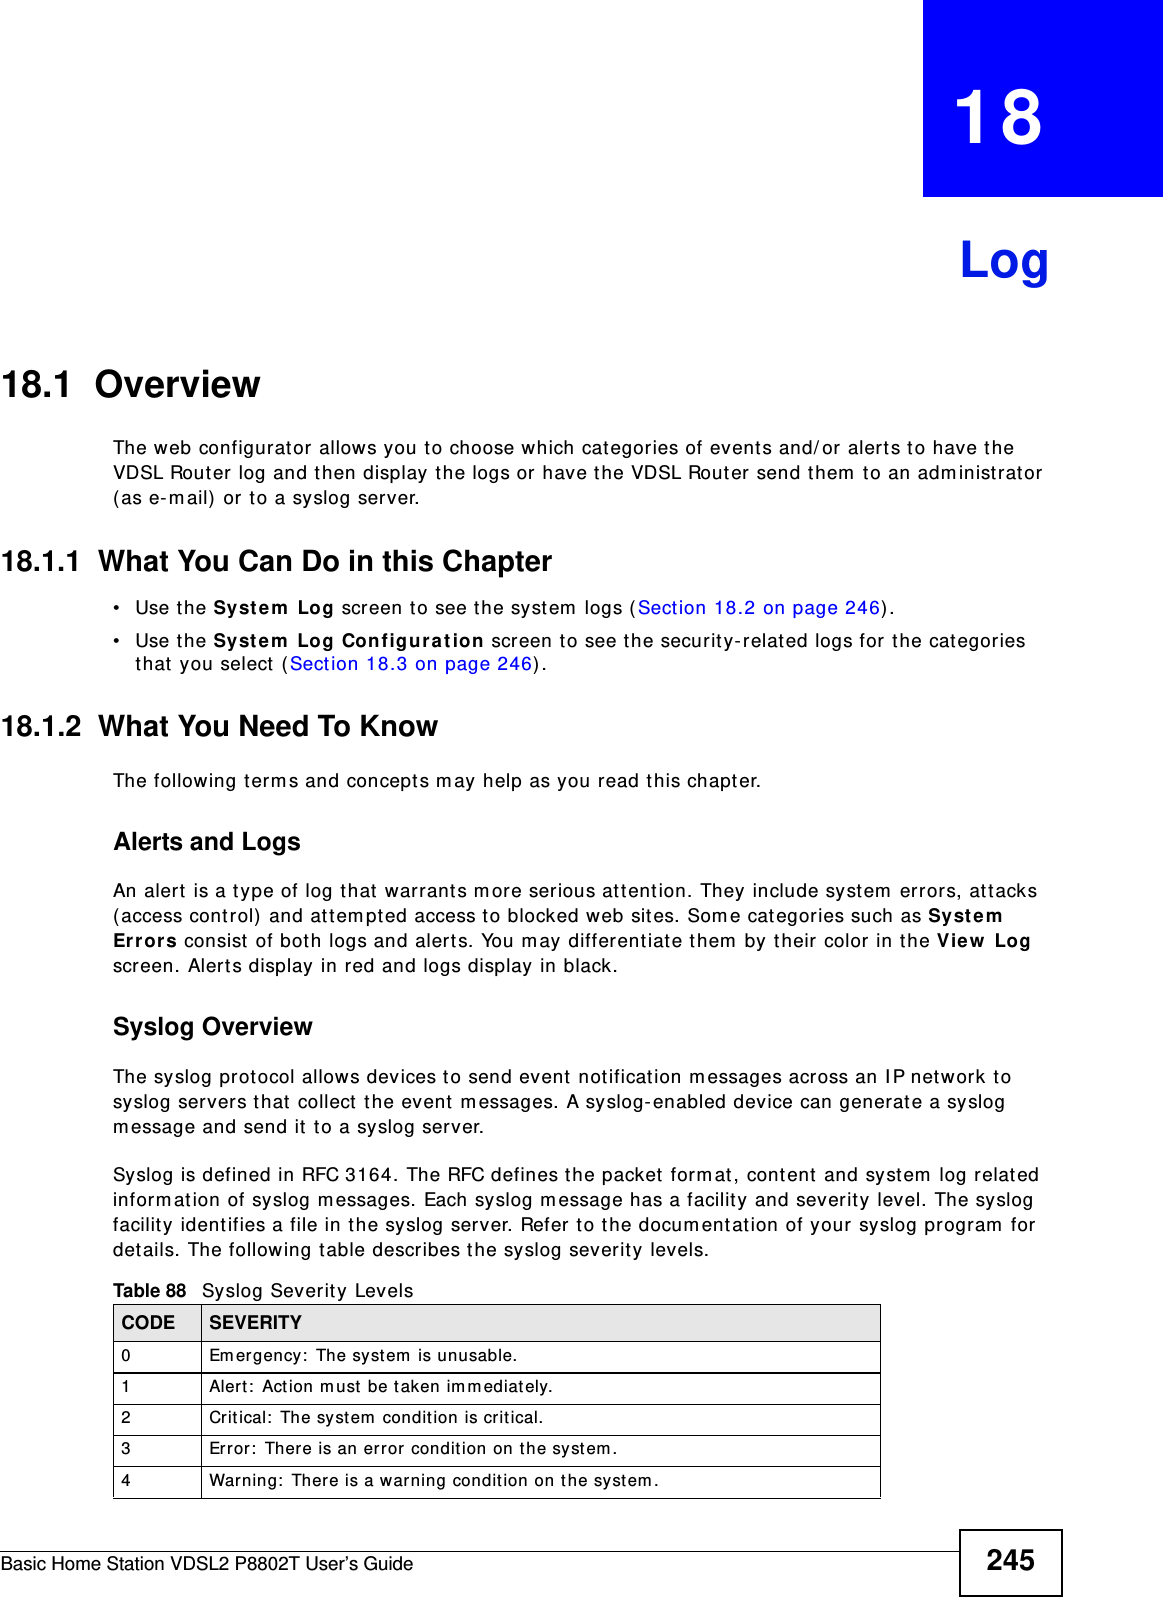 Basic Home Station VDSL2 P8802T User’s Guide 245CHAPTER   18Log18.1  OverviewThe web configurat or allow s you to choose which categories of event s and/ or alerts t o have t he VDSL Router log and then display the logs or have t he VDSL Router send t hem  to an adm inist rat or ( as e- m ail) or t o a syslog server. 18.1.1  What You Can Do in this Chapter• Use the System  Log screen t o see the syst em  logs ( Sect ion 18.2 on page 246) .• Use the Syst em  Log Configura t ion screen t o see t he security-relat ed logs for the cat egories that  you select  (Sect ion 18.3 on page 246) .18.1.2  What You Need To KnowThe following t erm s and concept s m ay help as you r ead t his chapter.Alerts and LogsAn alert  is a t ype of log that warrants m ore serious att ent ion. They include syst em  errors, att acks ( access control) and at tem pt ed access to blocked web sites. Som e categories such as Syst em  Er rors consist of bot h logs and alerts. You m ay different iat e them  by their  color in the V iew  Log screen. Alerts display in red and logs display in black.Syslog Overview The syslog pr ot ocol allows devices to send event  not ification m essages across an I P network to syslog servers t hat  collect  t he event m essages. A syslog-enabled device can generat e a syslog m essage and send it t o a syslog server.Syslog is defined in RFC 3164. The RFC defines the packet form at , cont ent  and syst em  log relat ed inform ation of syslog m essages. Each syslog m essage has a facility and severit y level. The syslog facilit y identifies a file in the syslog server. Refer t o the docum ent ation of your syslog program  for details. The following t able describes the syslog severit y levels. Table 88   Syslog Severit y LevelsCODE SEVERITY0 Em ergency:  The syst em  is unusable.1 Aler t :  Act ion m ust  be t aken im m ediately.2 Crit ical:  The sy st em  condit ion is critical.3 Error :  There is an error condit ion on t he syst em .4 Warning:  There is a warning condition on the syst em .